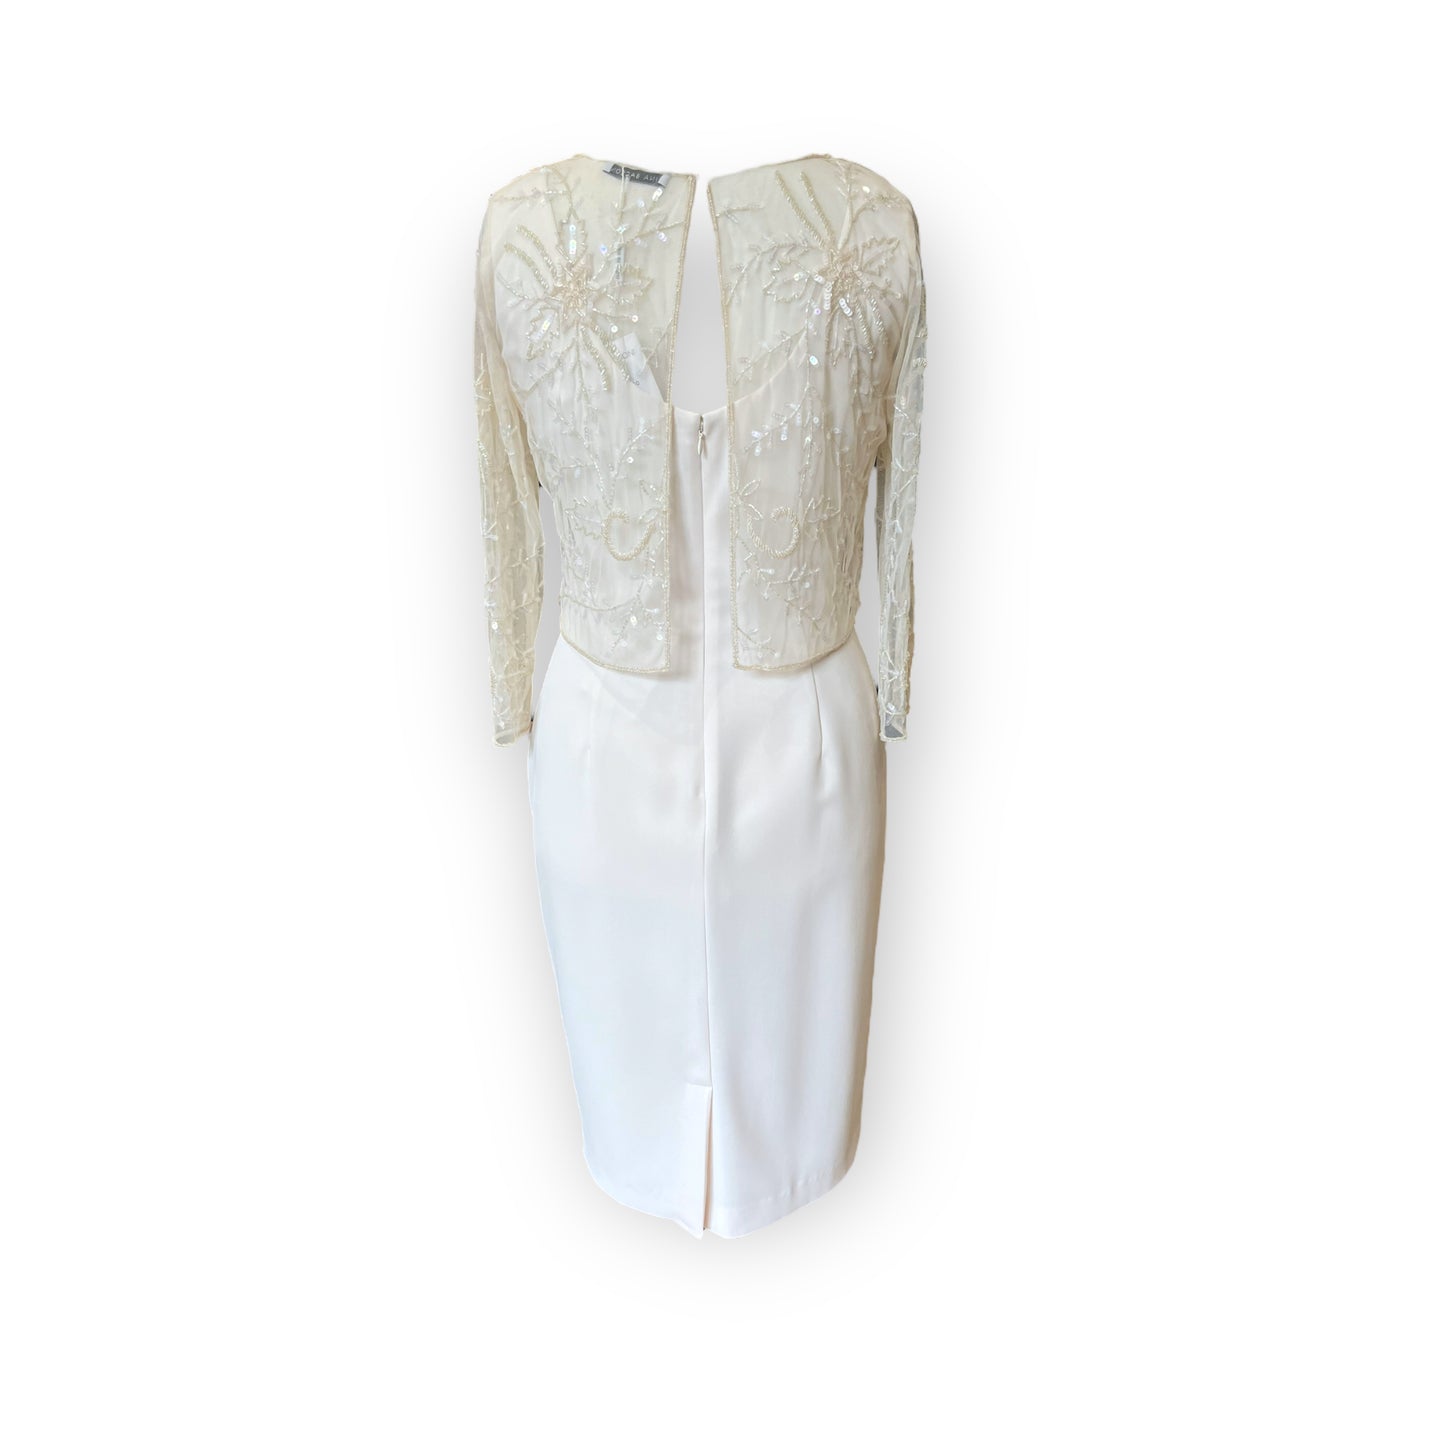 NEW Gina Bacconi Cream Dress and Lace Over Top